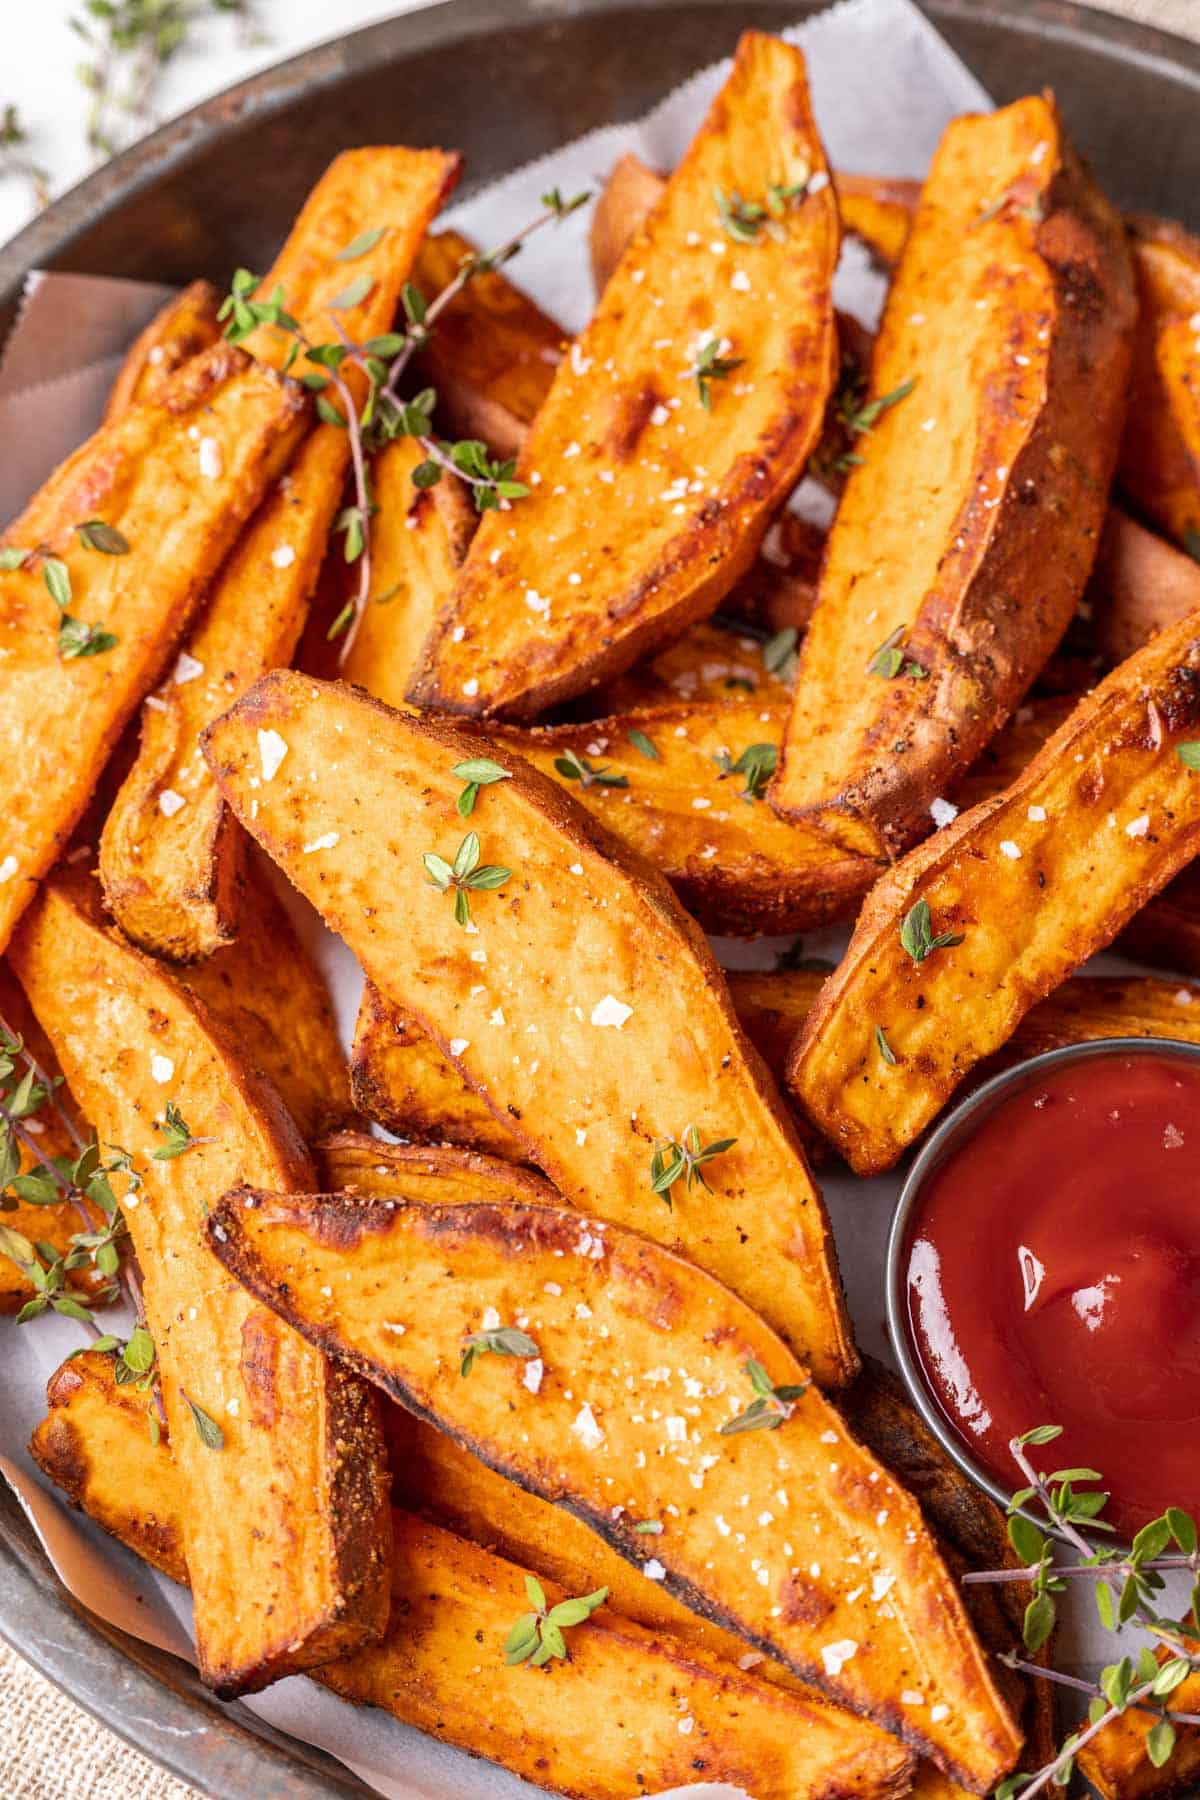 Sweet potato wedges sprinkles with salt and served with ketchup.